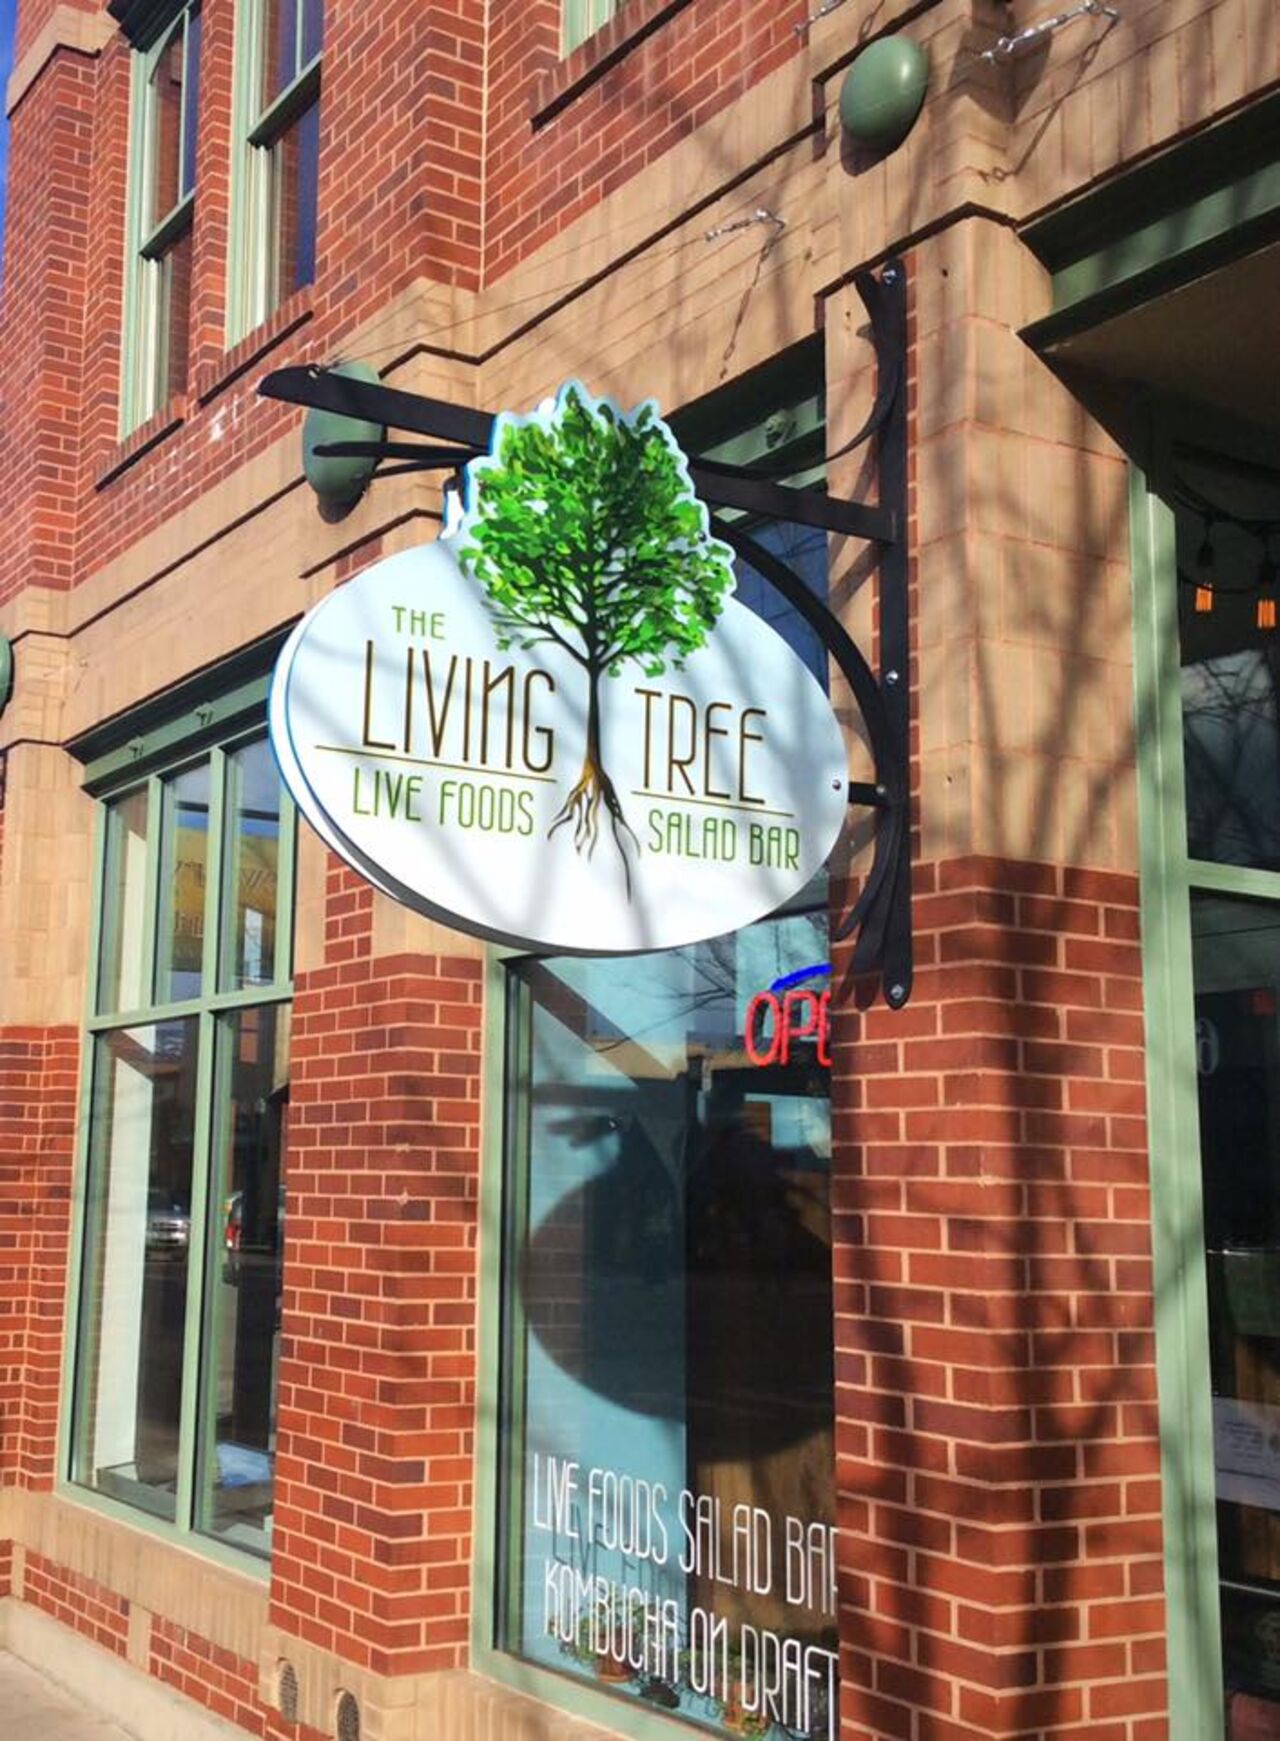 A photo of The Living Tree Live Foods Salad Bar